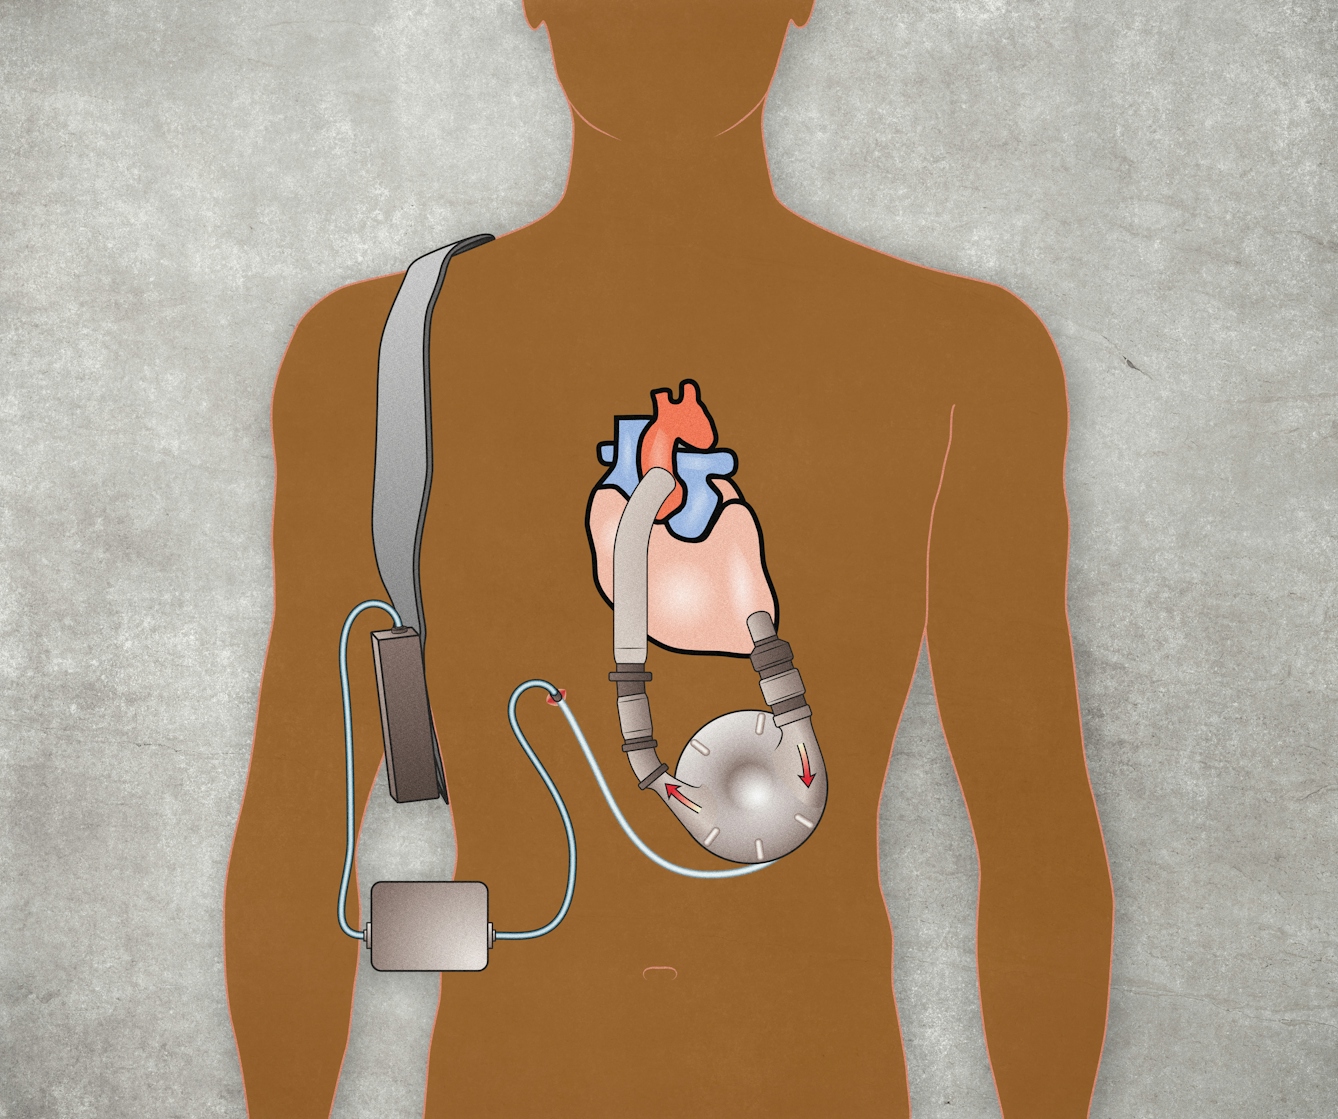 A brown silhouette illustration of a man from the waist up, in front of a cloudy grey background. At the center of the man there is a medical illustration of a heart and a ventricular assist device (LVAD). The device is comprised of a grey circle with one tube connected to the aorta and the other to the base of the heart. There is a wire from the device that connects the internal LVAD to the external control unit through the abdomen. A further wire connects the control unit to a battery pack which is attached to a strap around the man's shoulder.